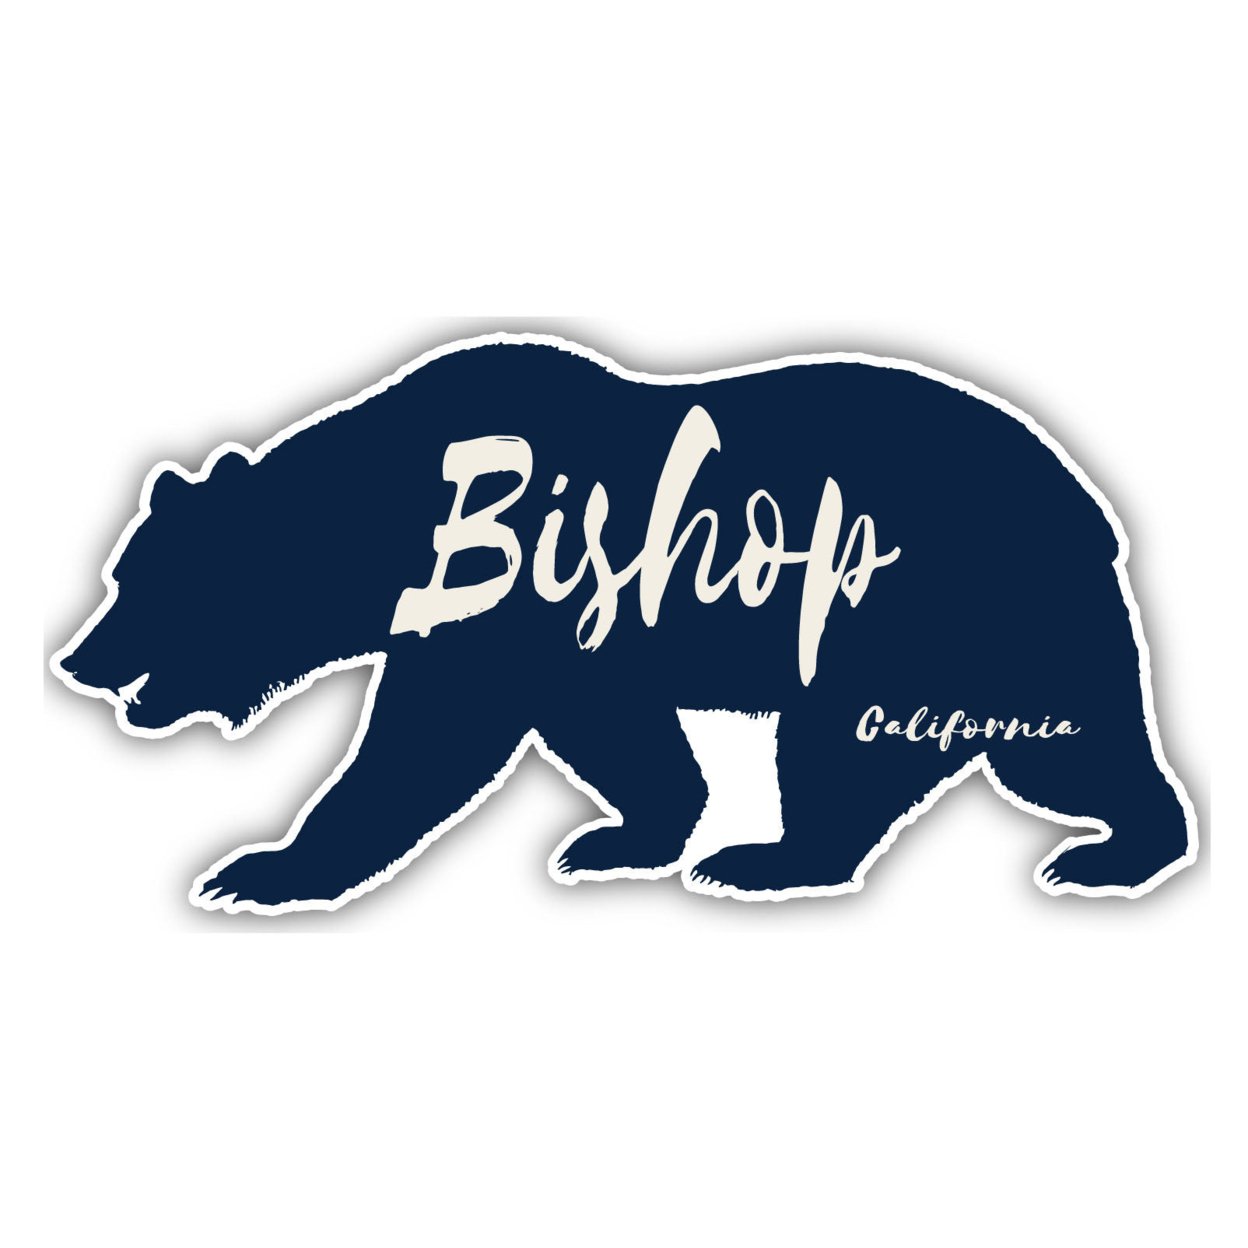 Bishop California Souvenir Decorative Stickers (Choose Theme And Size) - 4-Pack, 4-Inch, Bear